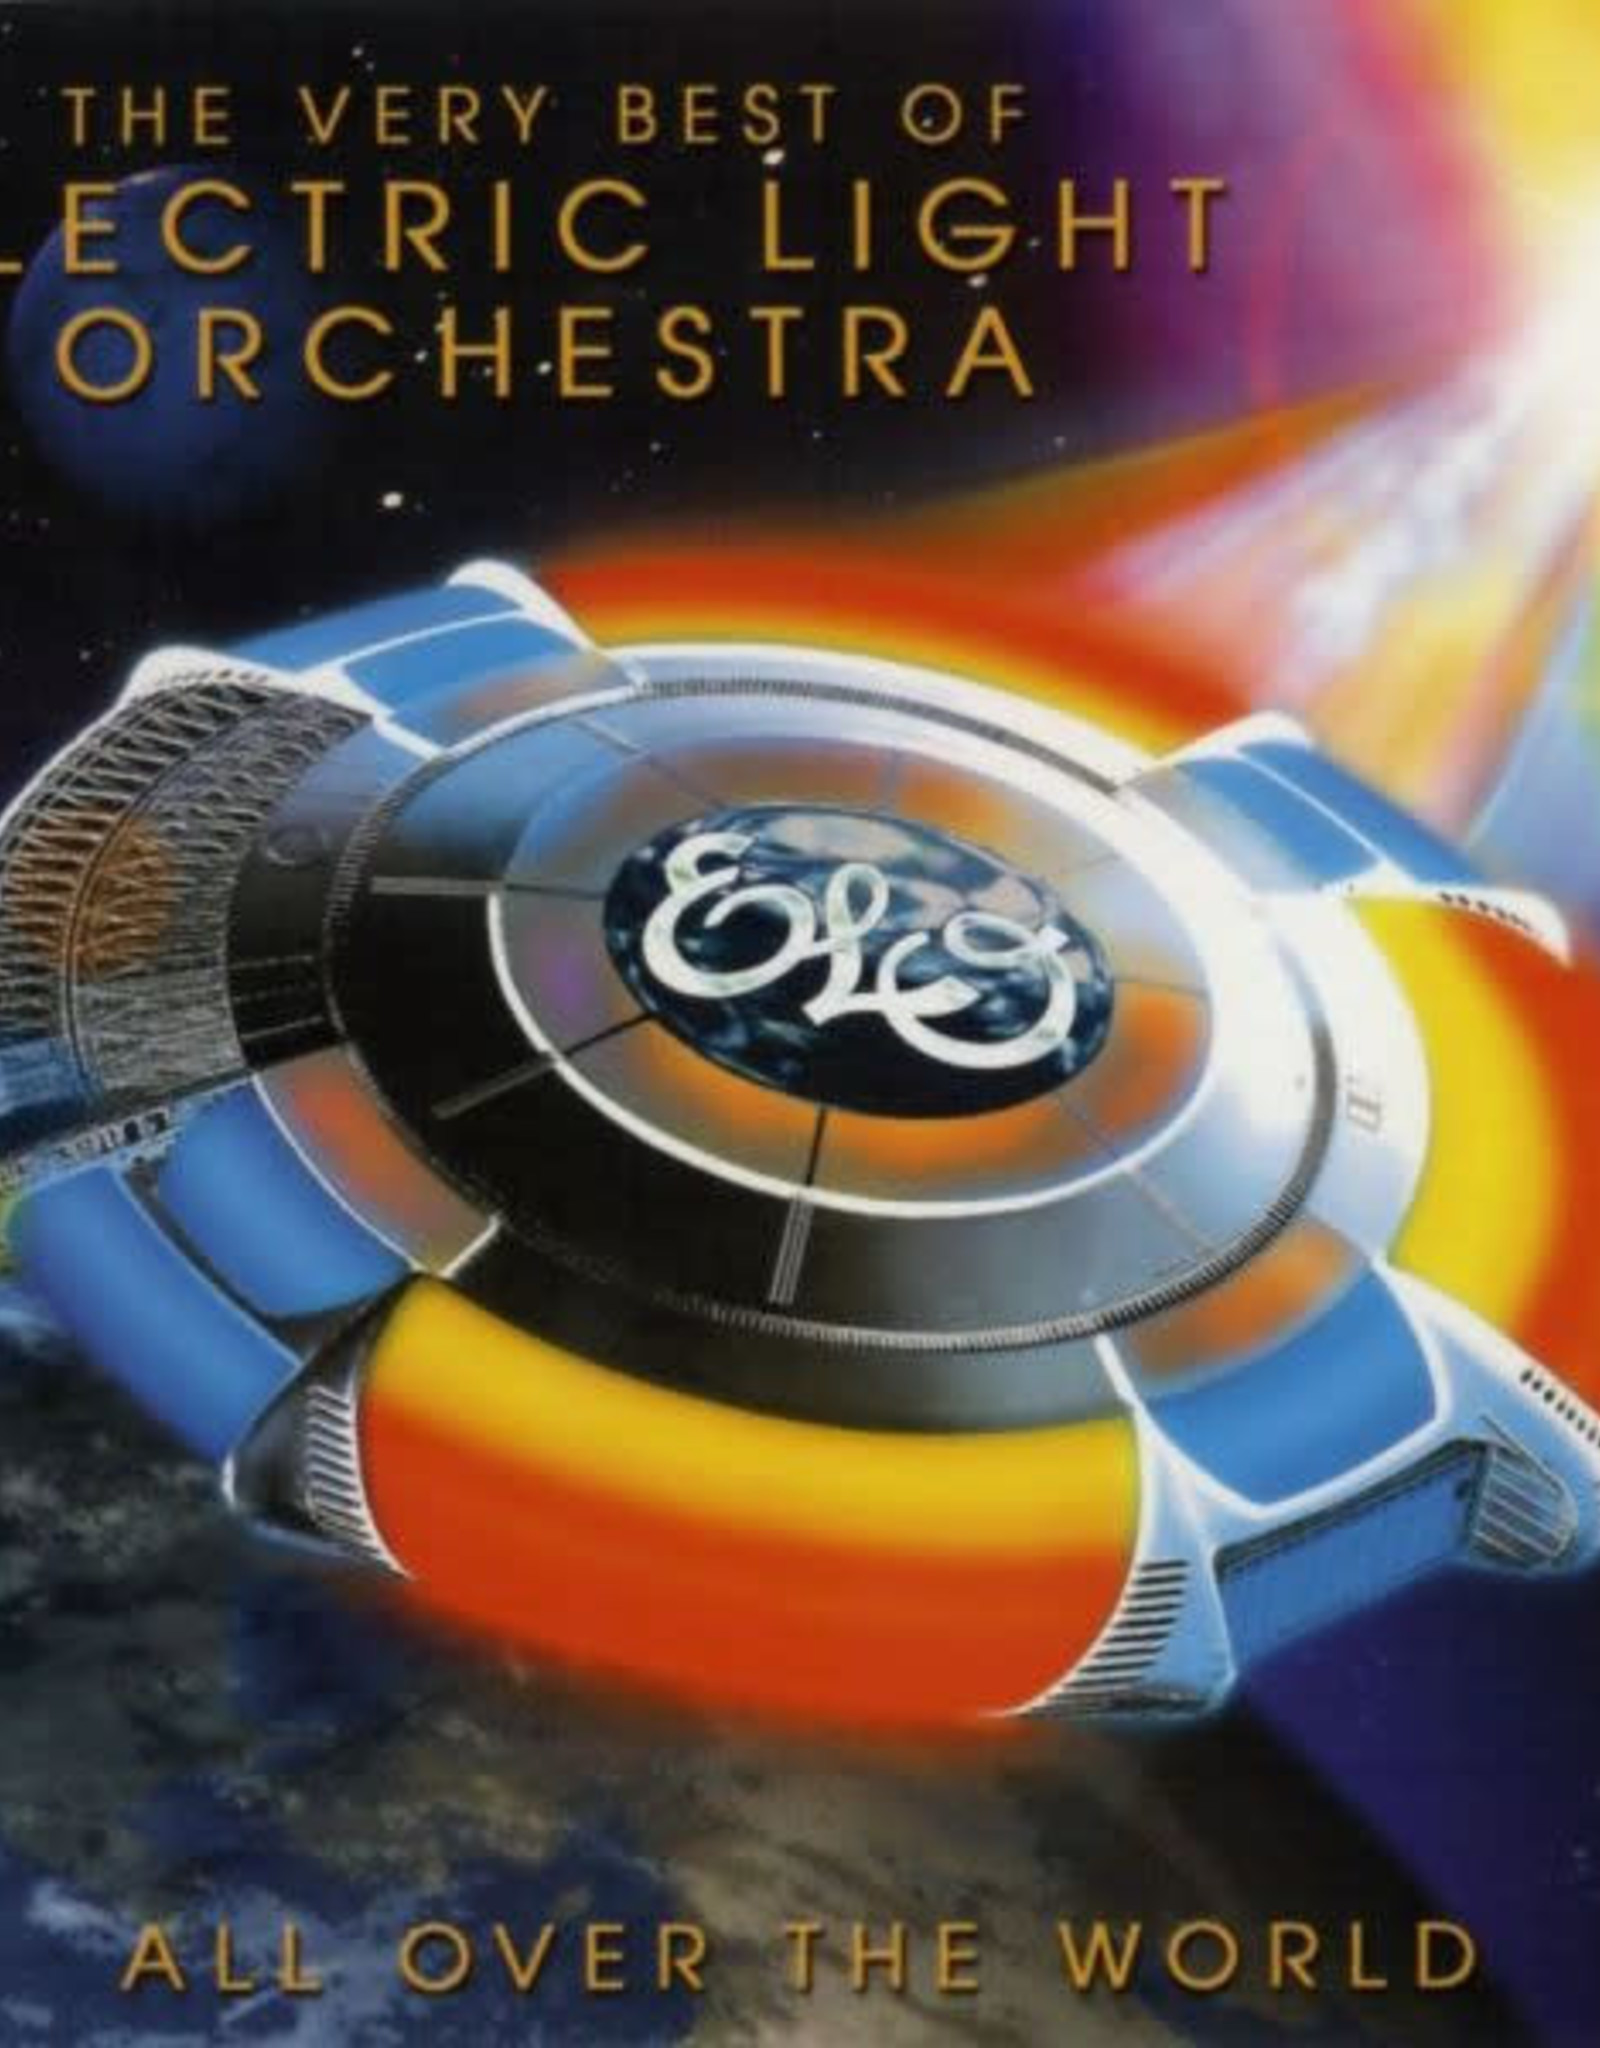 ELO - All Over The World - The Very Best Of Electric Light Orchestra (Color Vinyl)